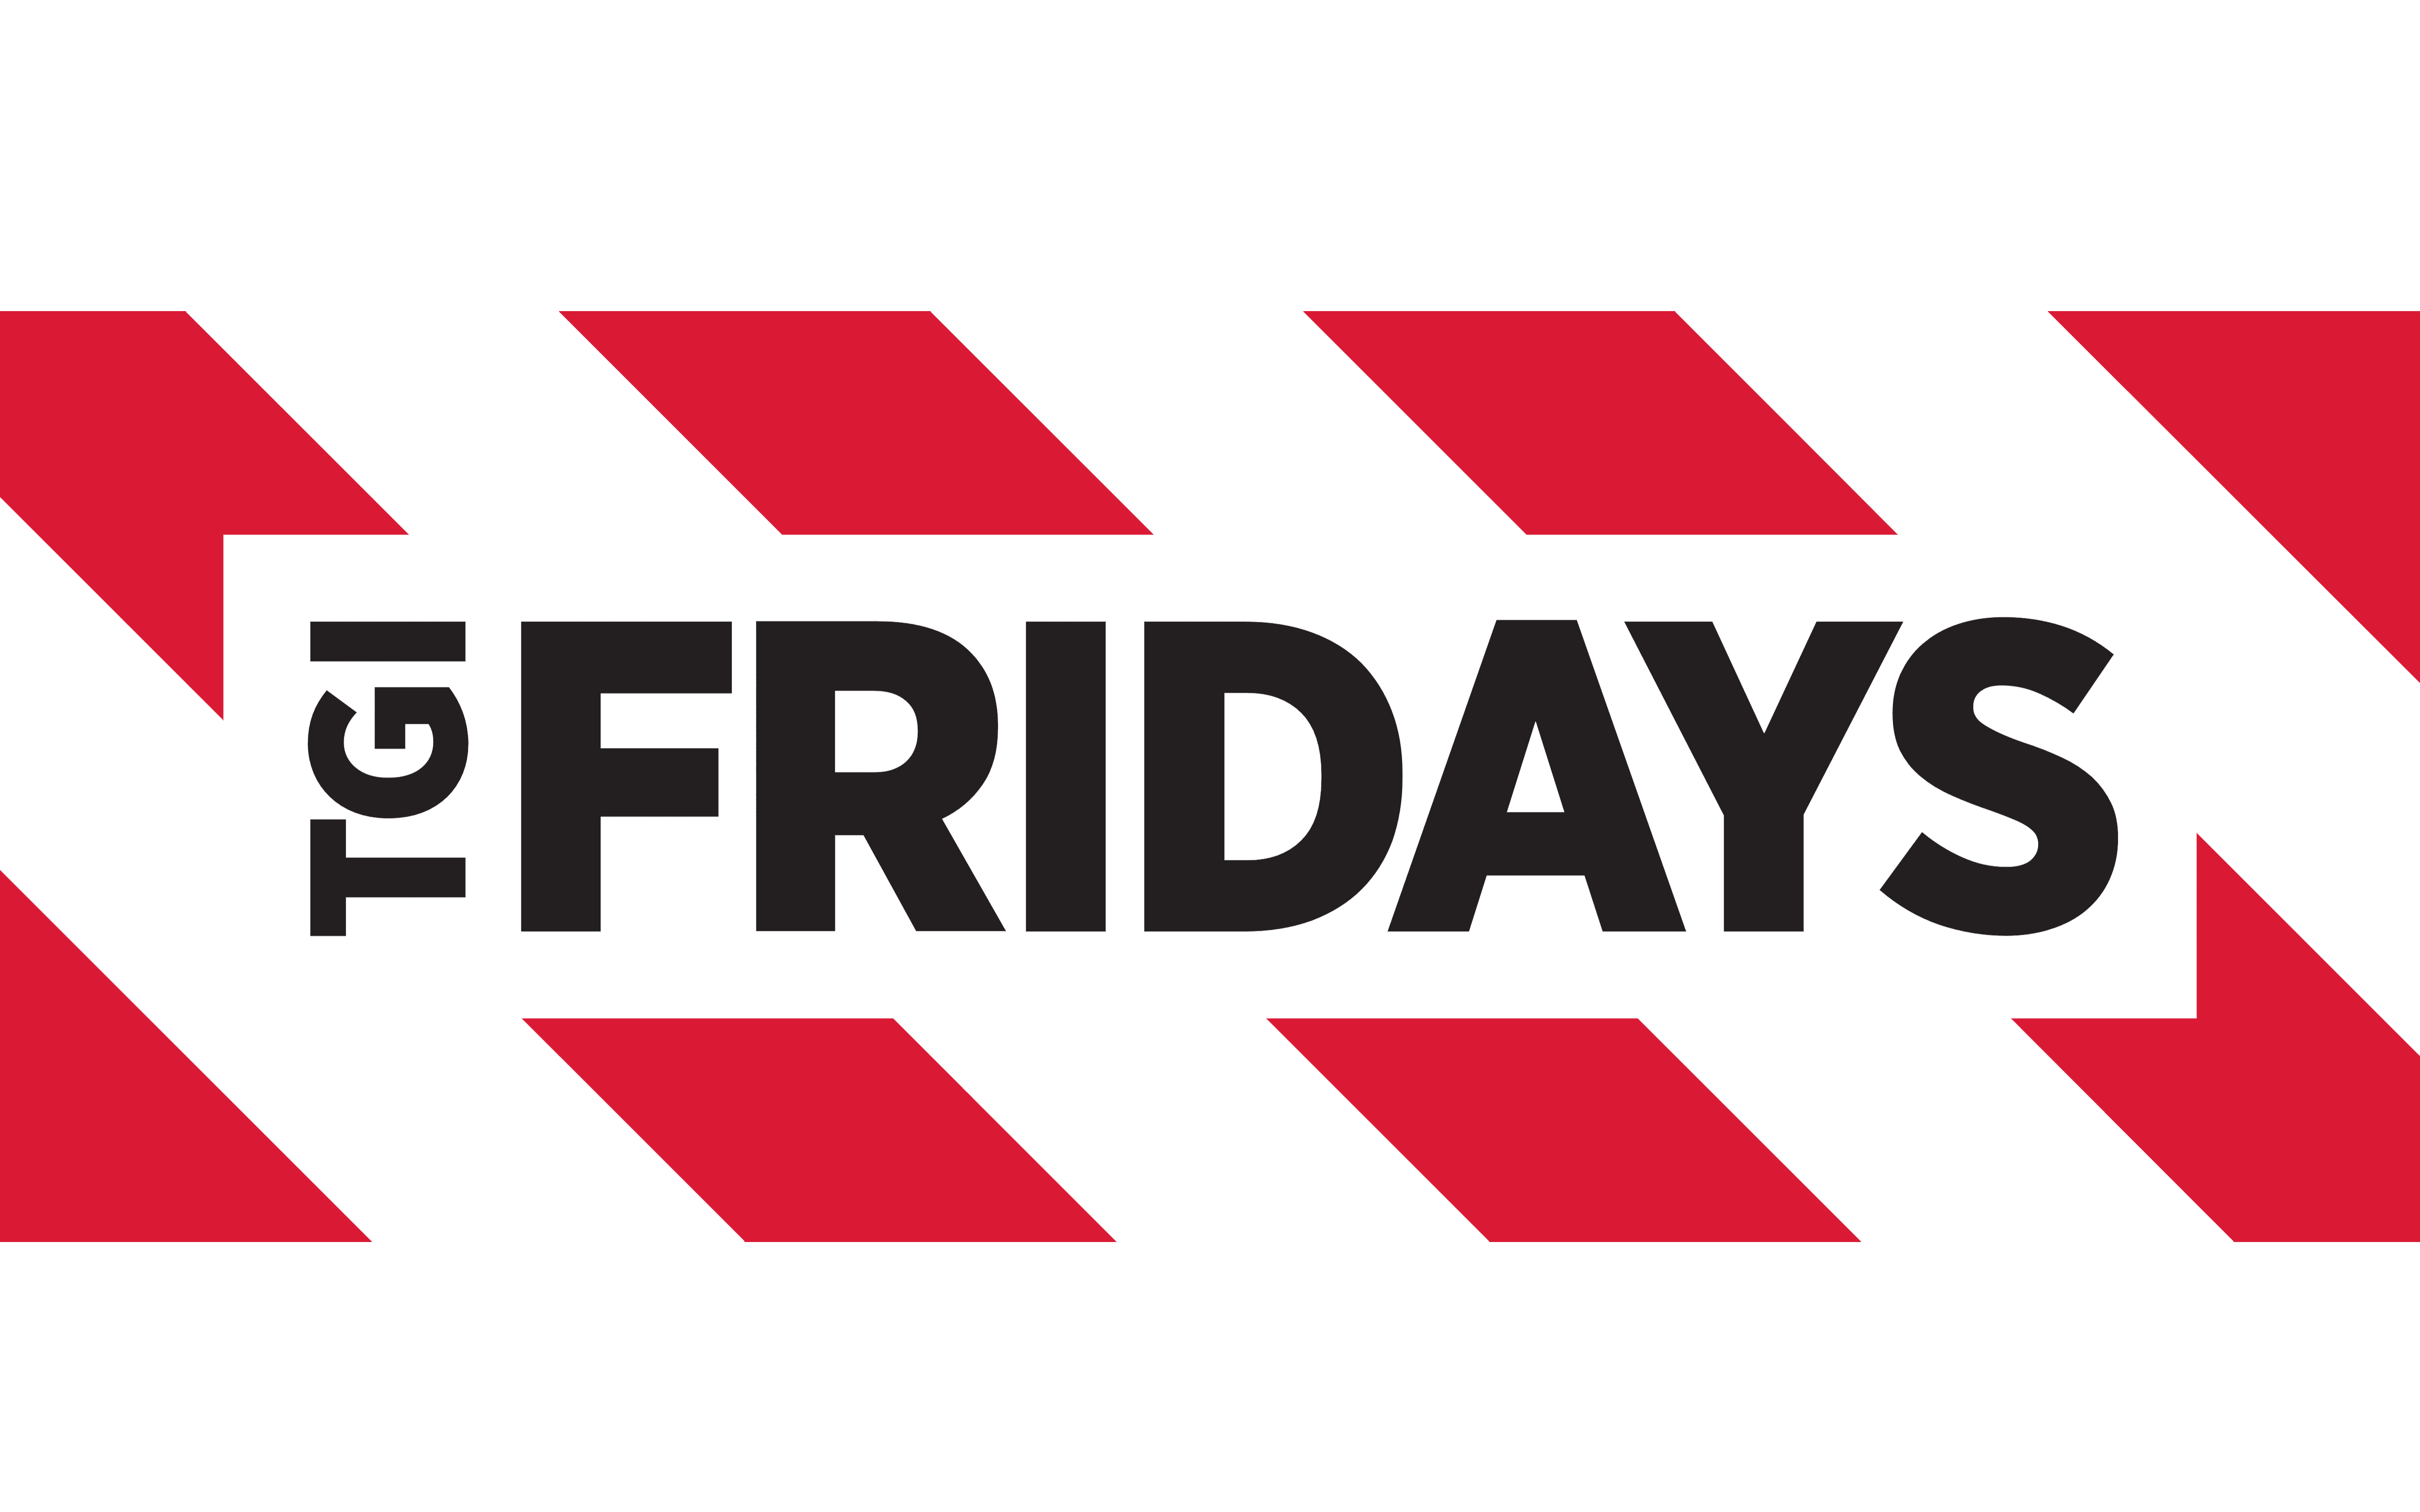 A black background with red text that reads " the fridays ".